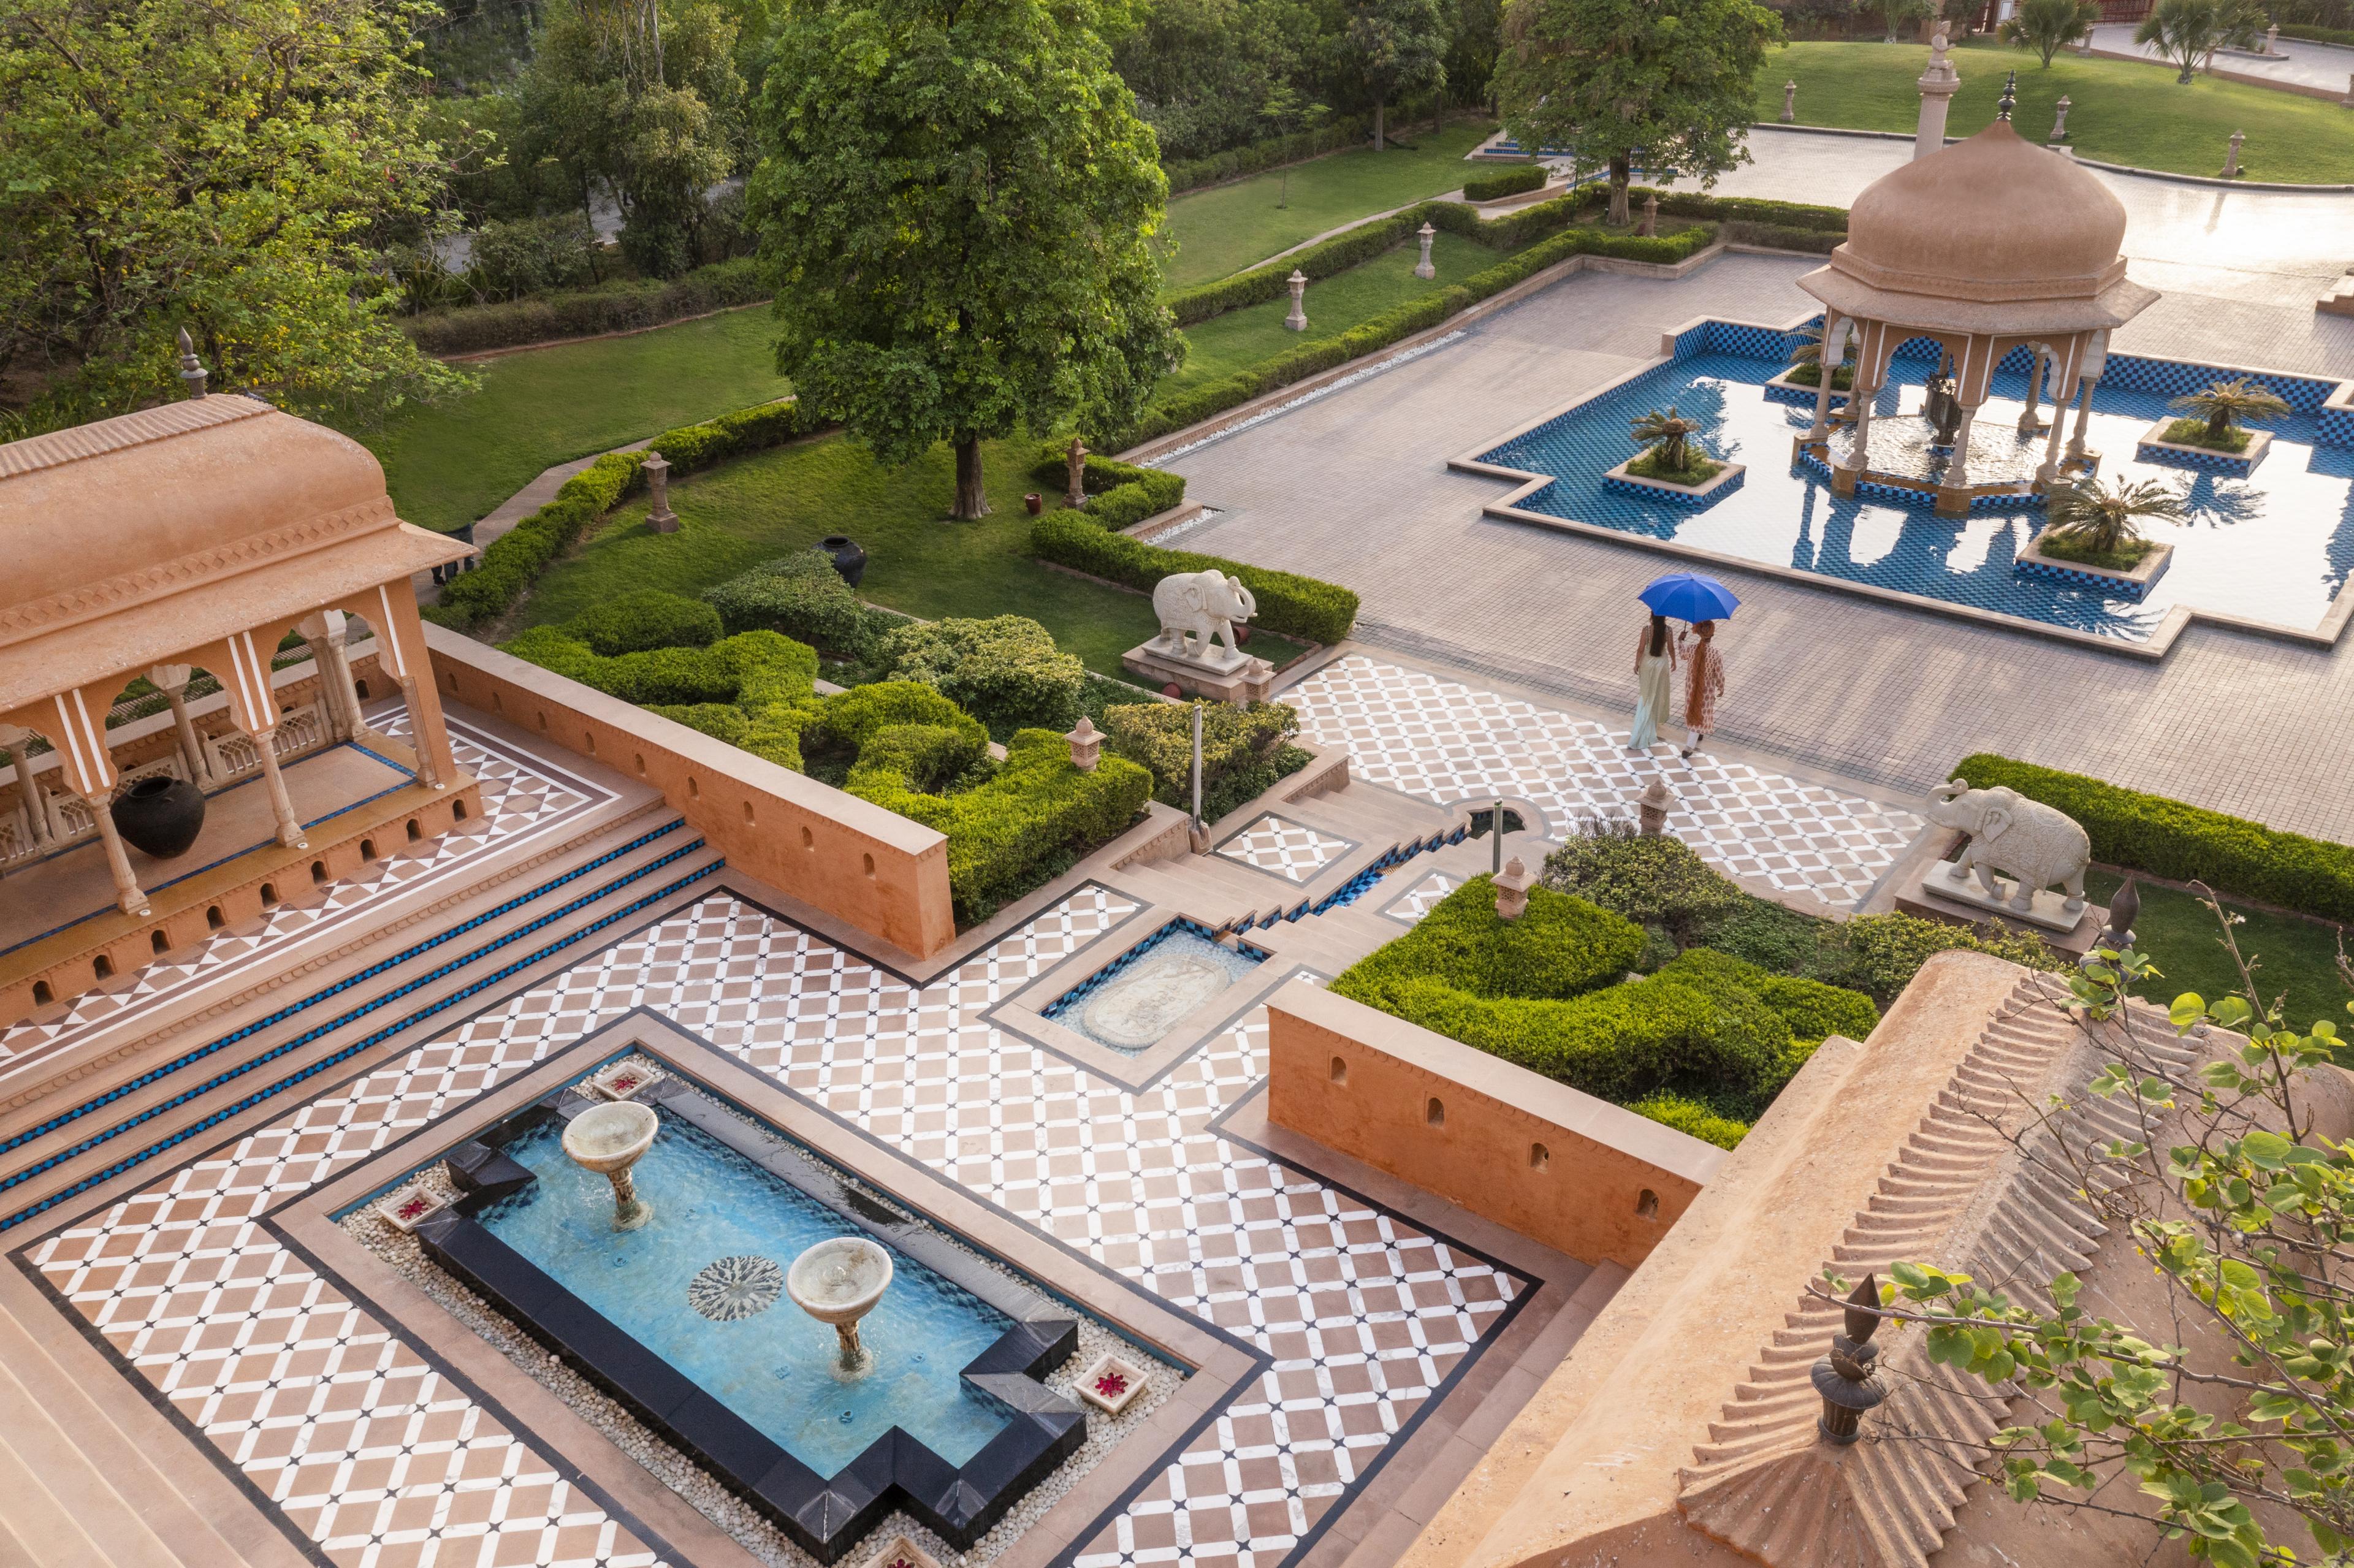 Indian style fountains in a tiled garden